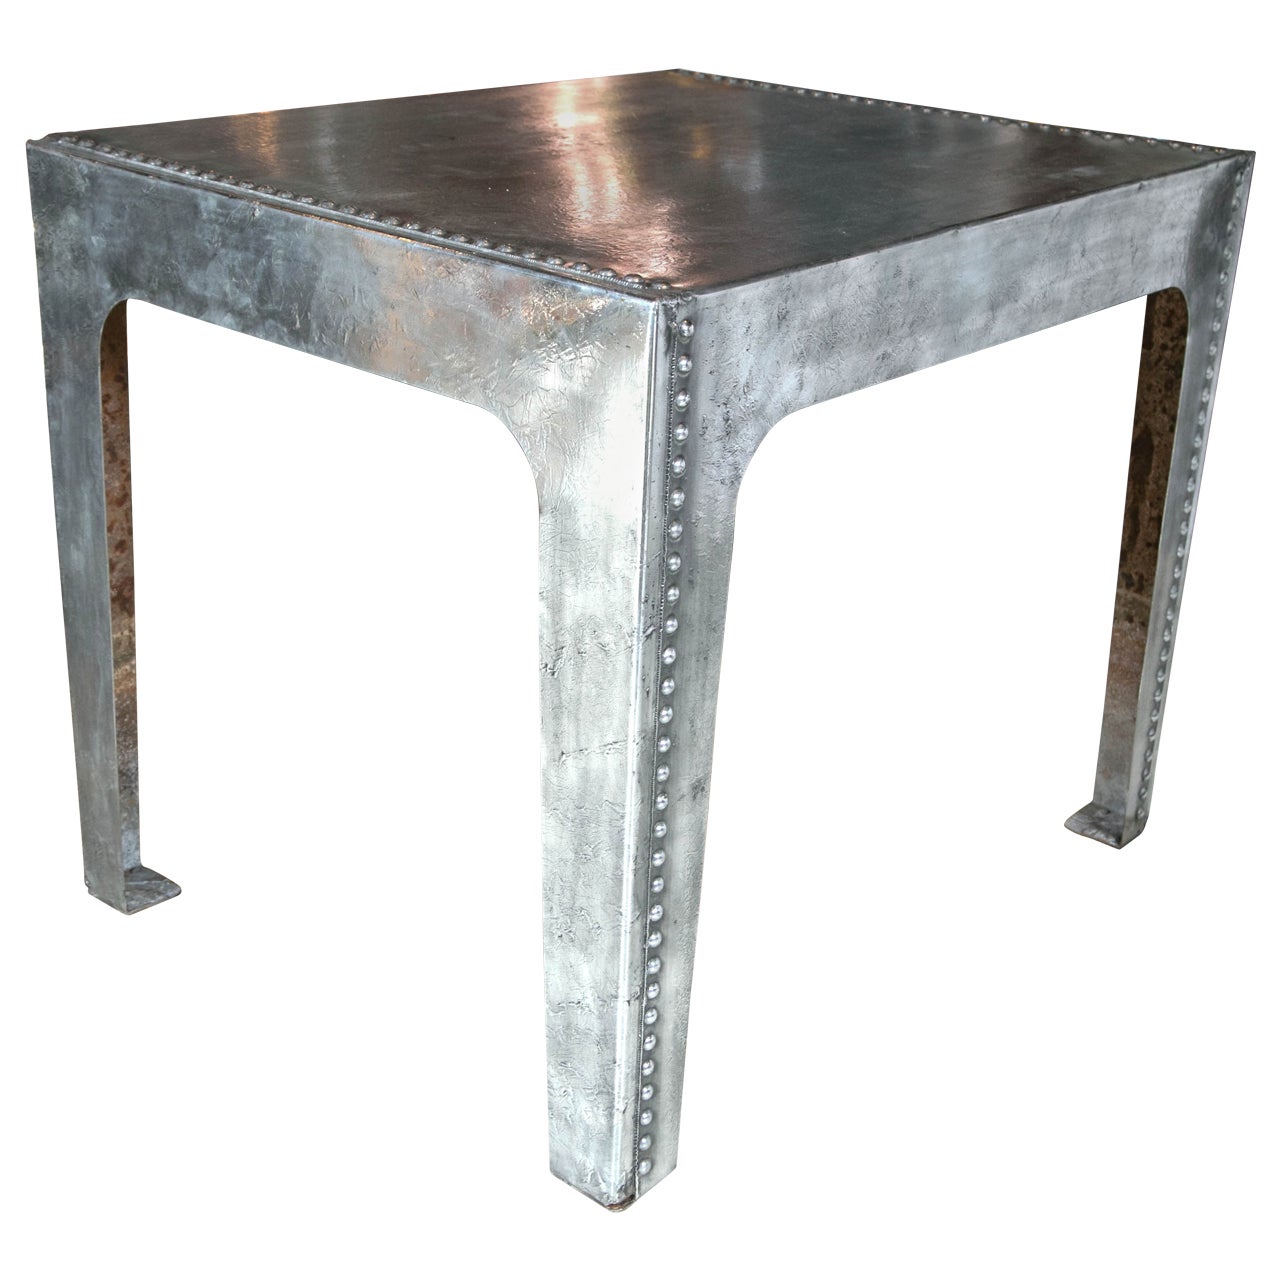 English Polished Steel Studded Water Tank Table For Sale